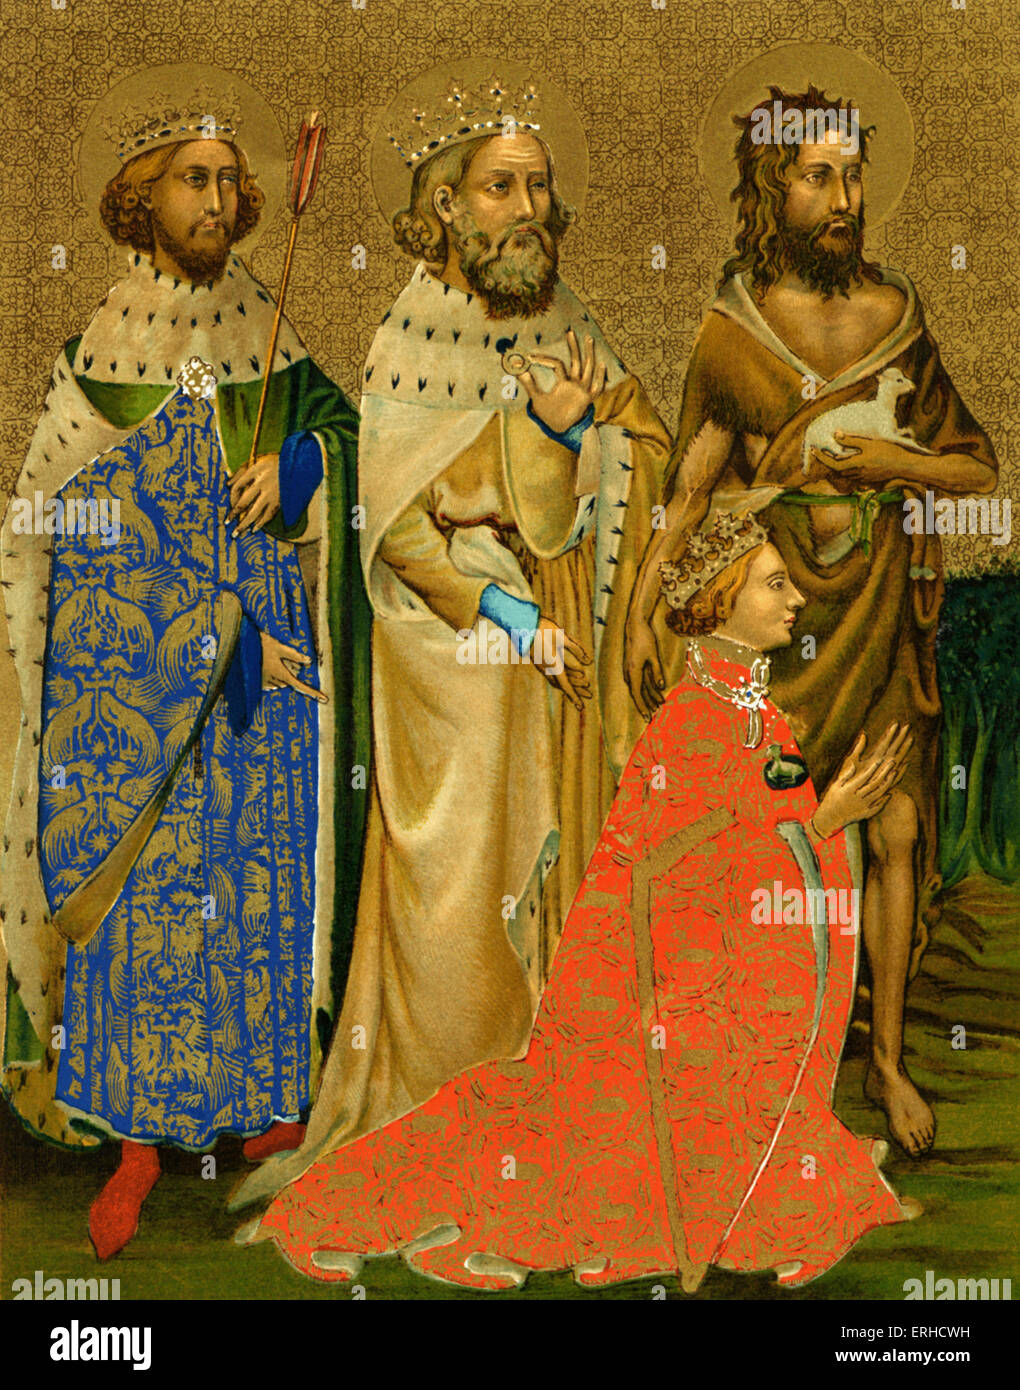 RICHARD II - with his patron saints King of England, 14thC.  Time of Lionel POWER; Aleyn/Alain/Alanus From the Wilton Dyptich. Stock Photo